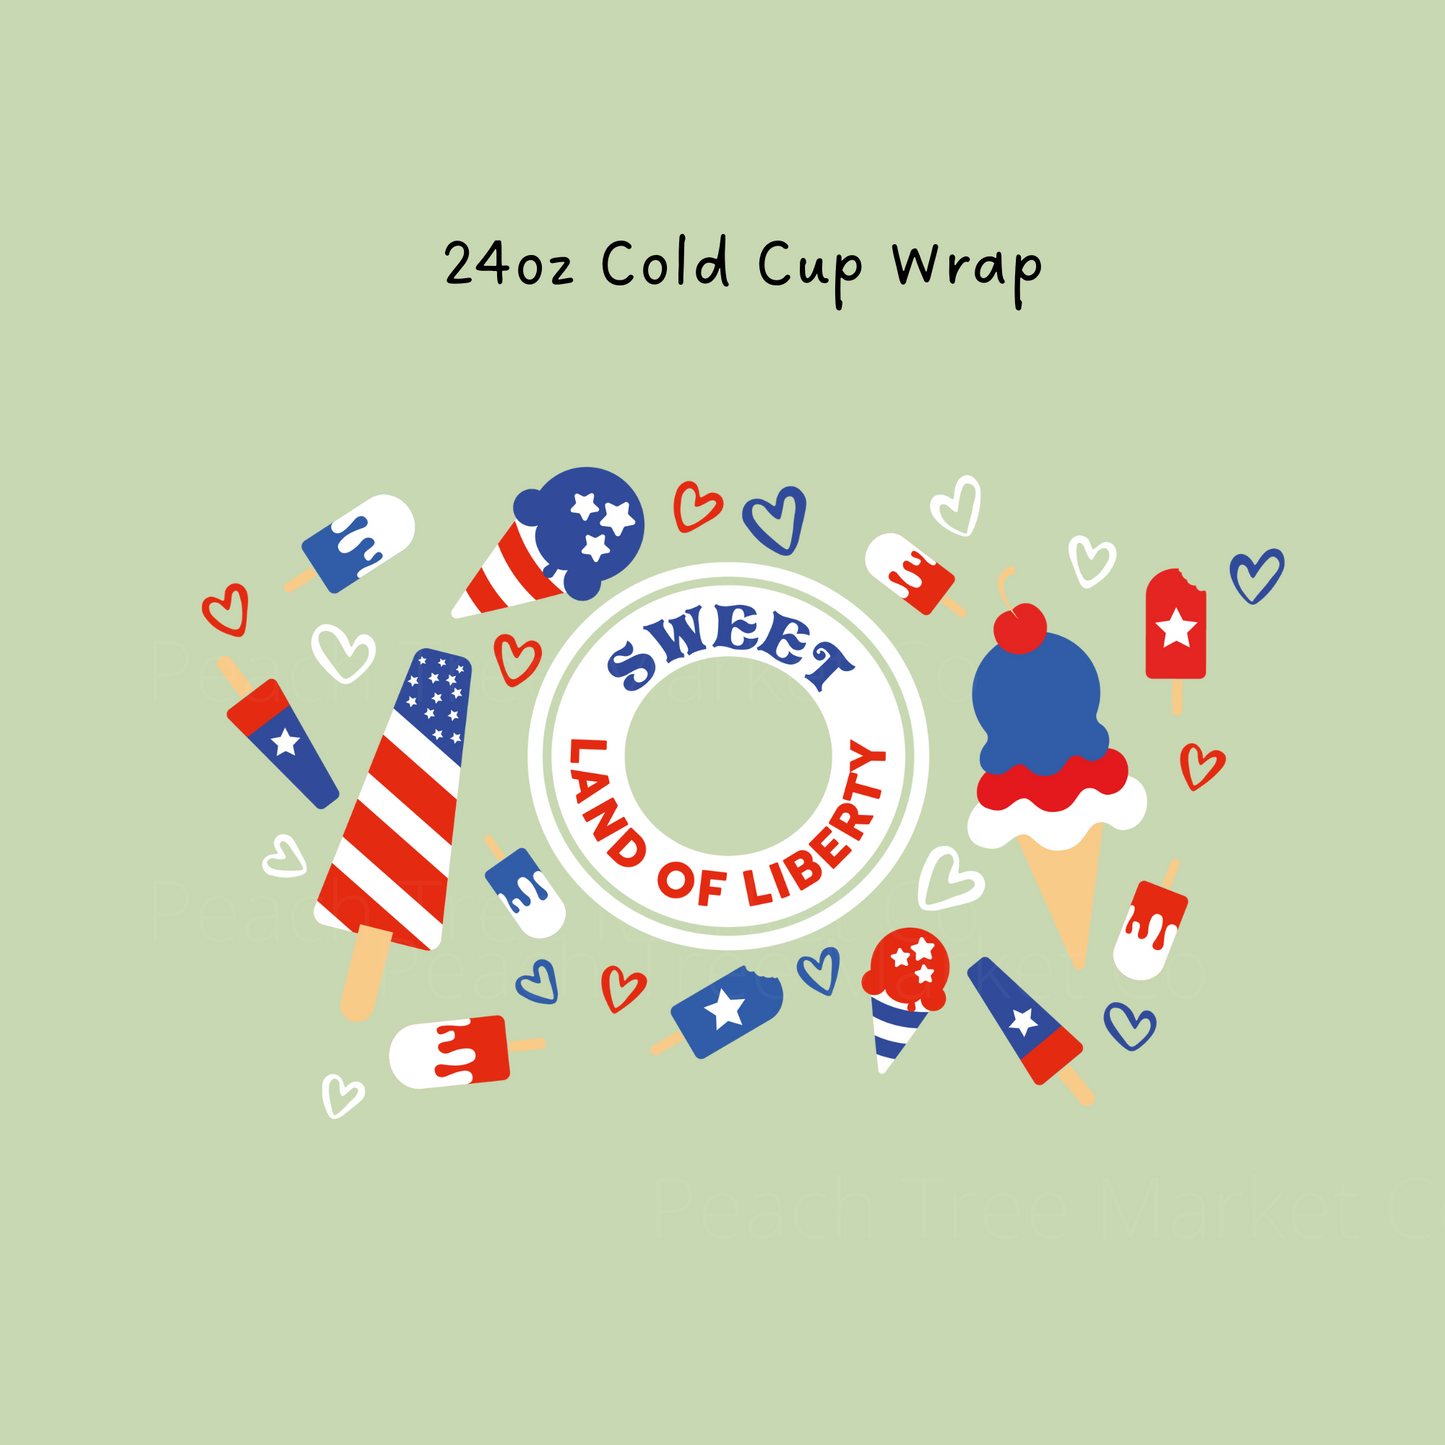 Sweet Land Of Liberty 24 oz Cold Cup Wrap